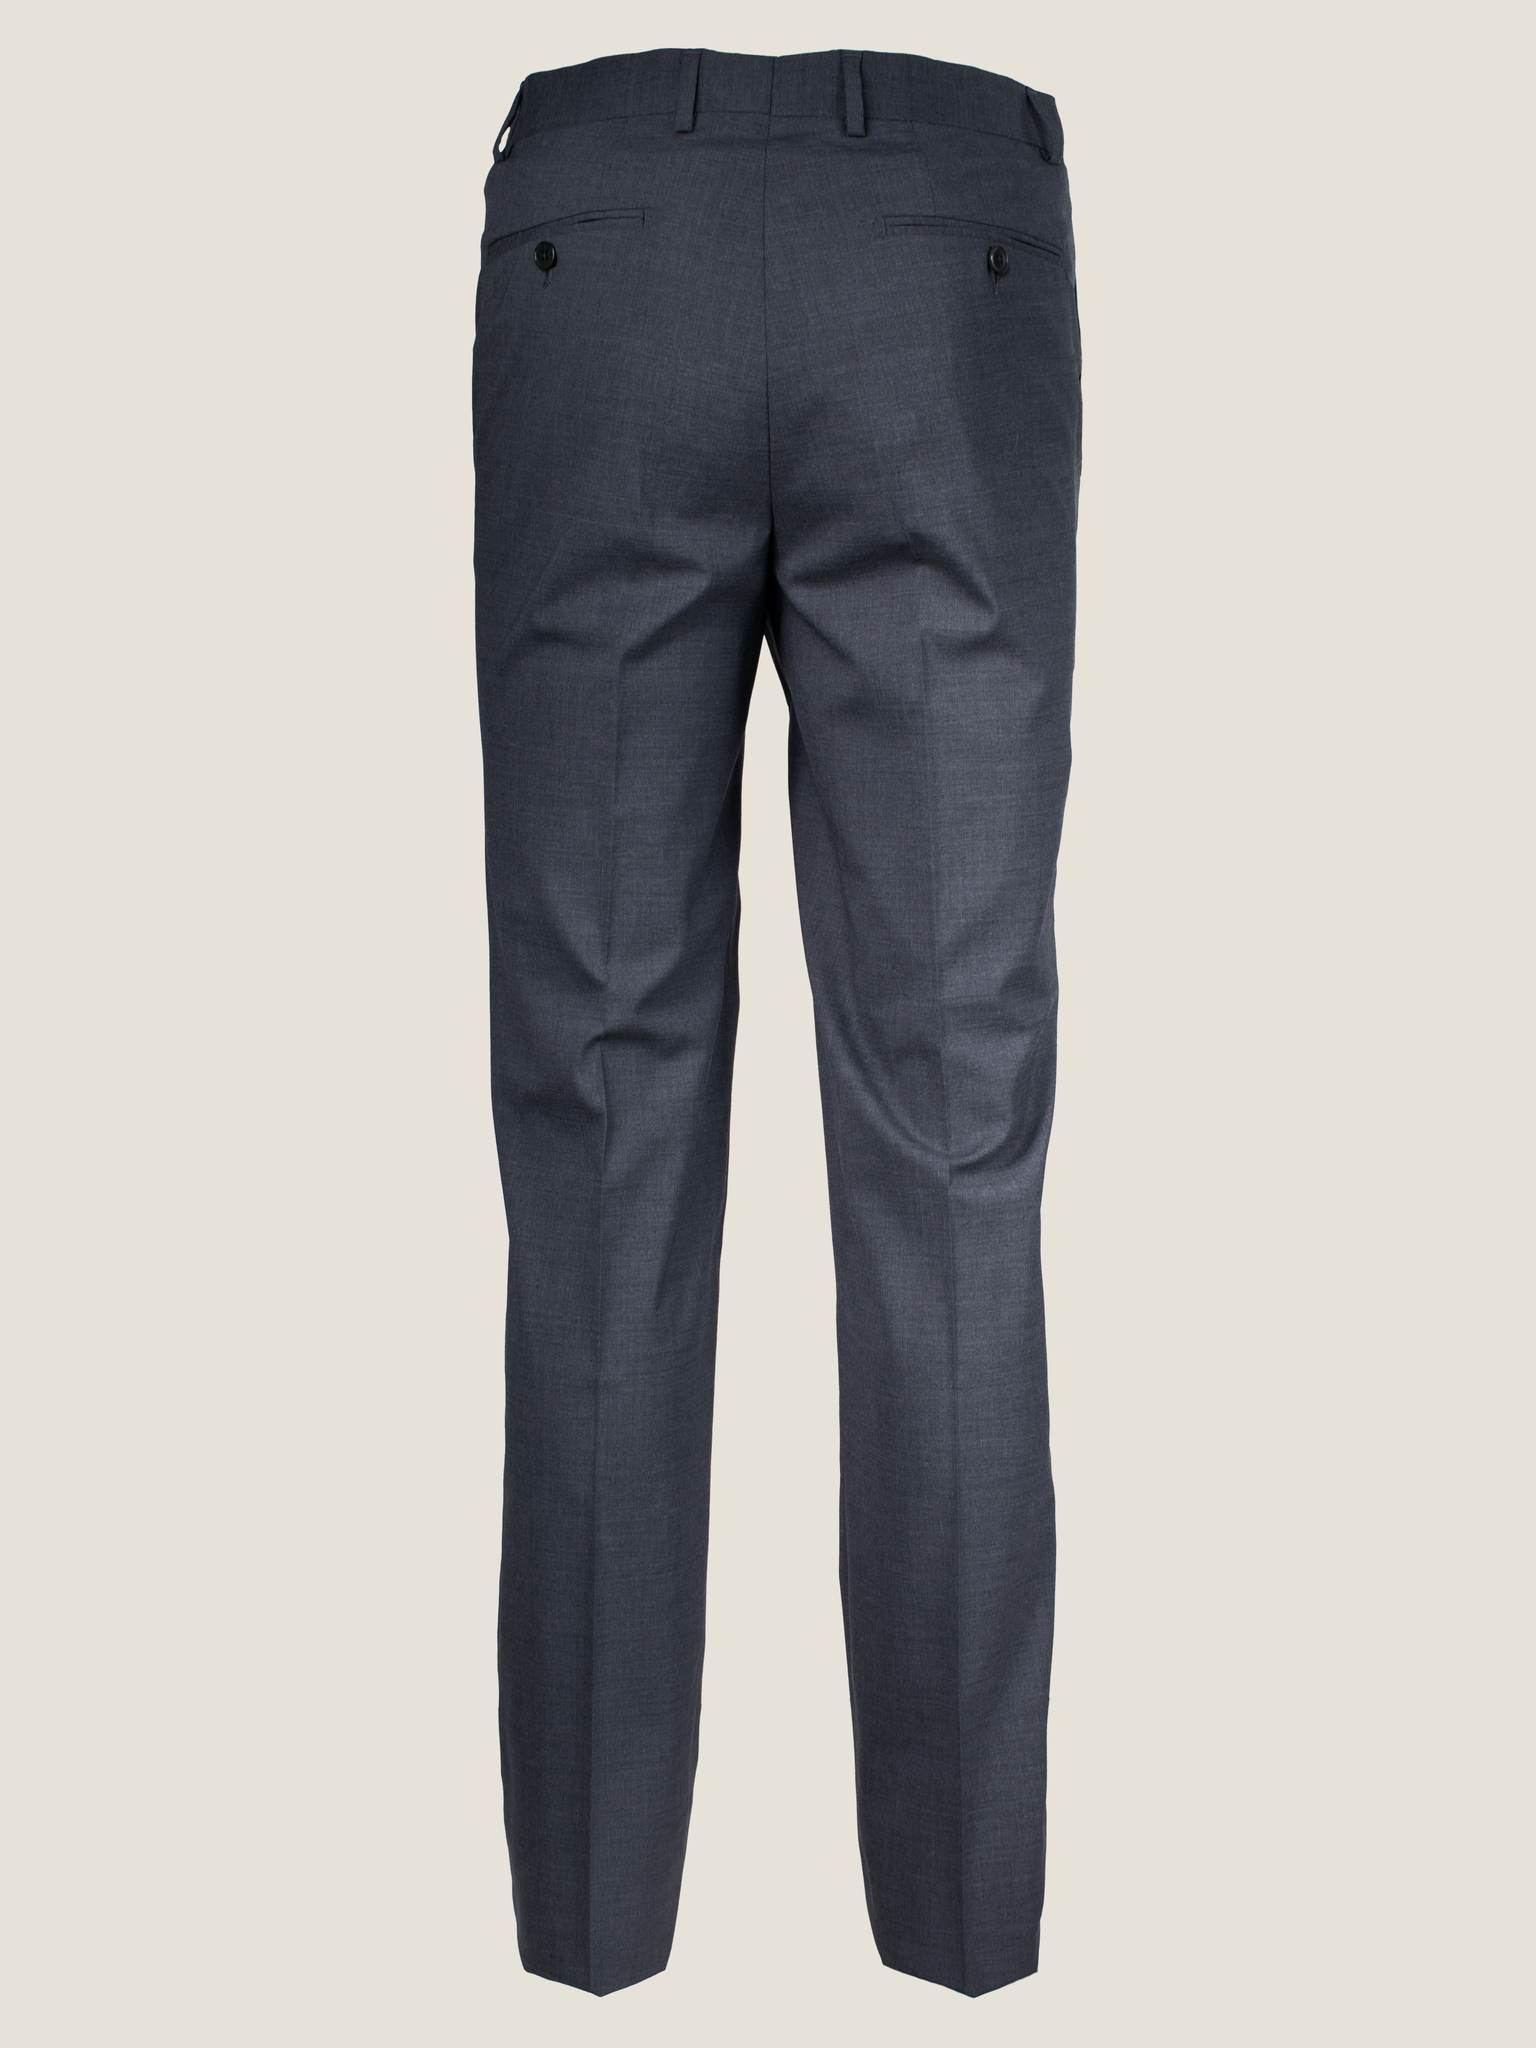 Essential Charcoal Suit Trouser